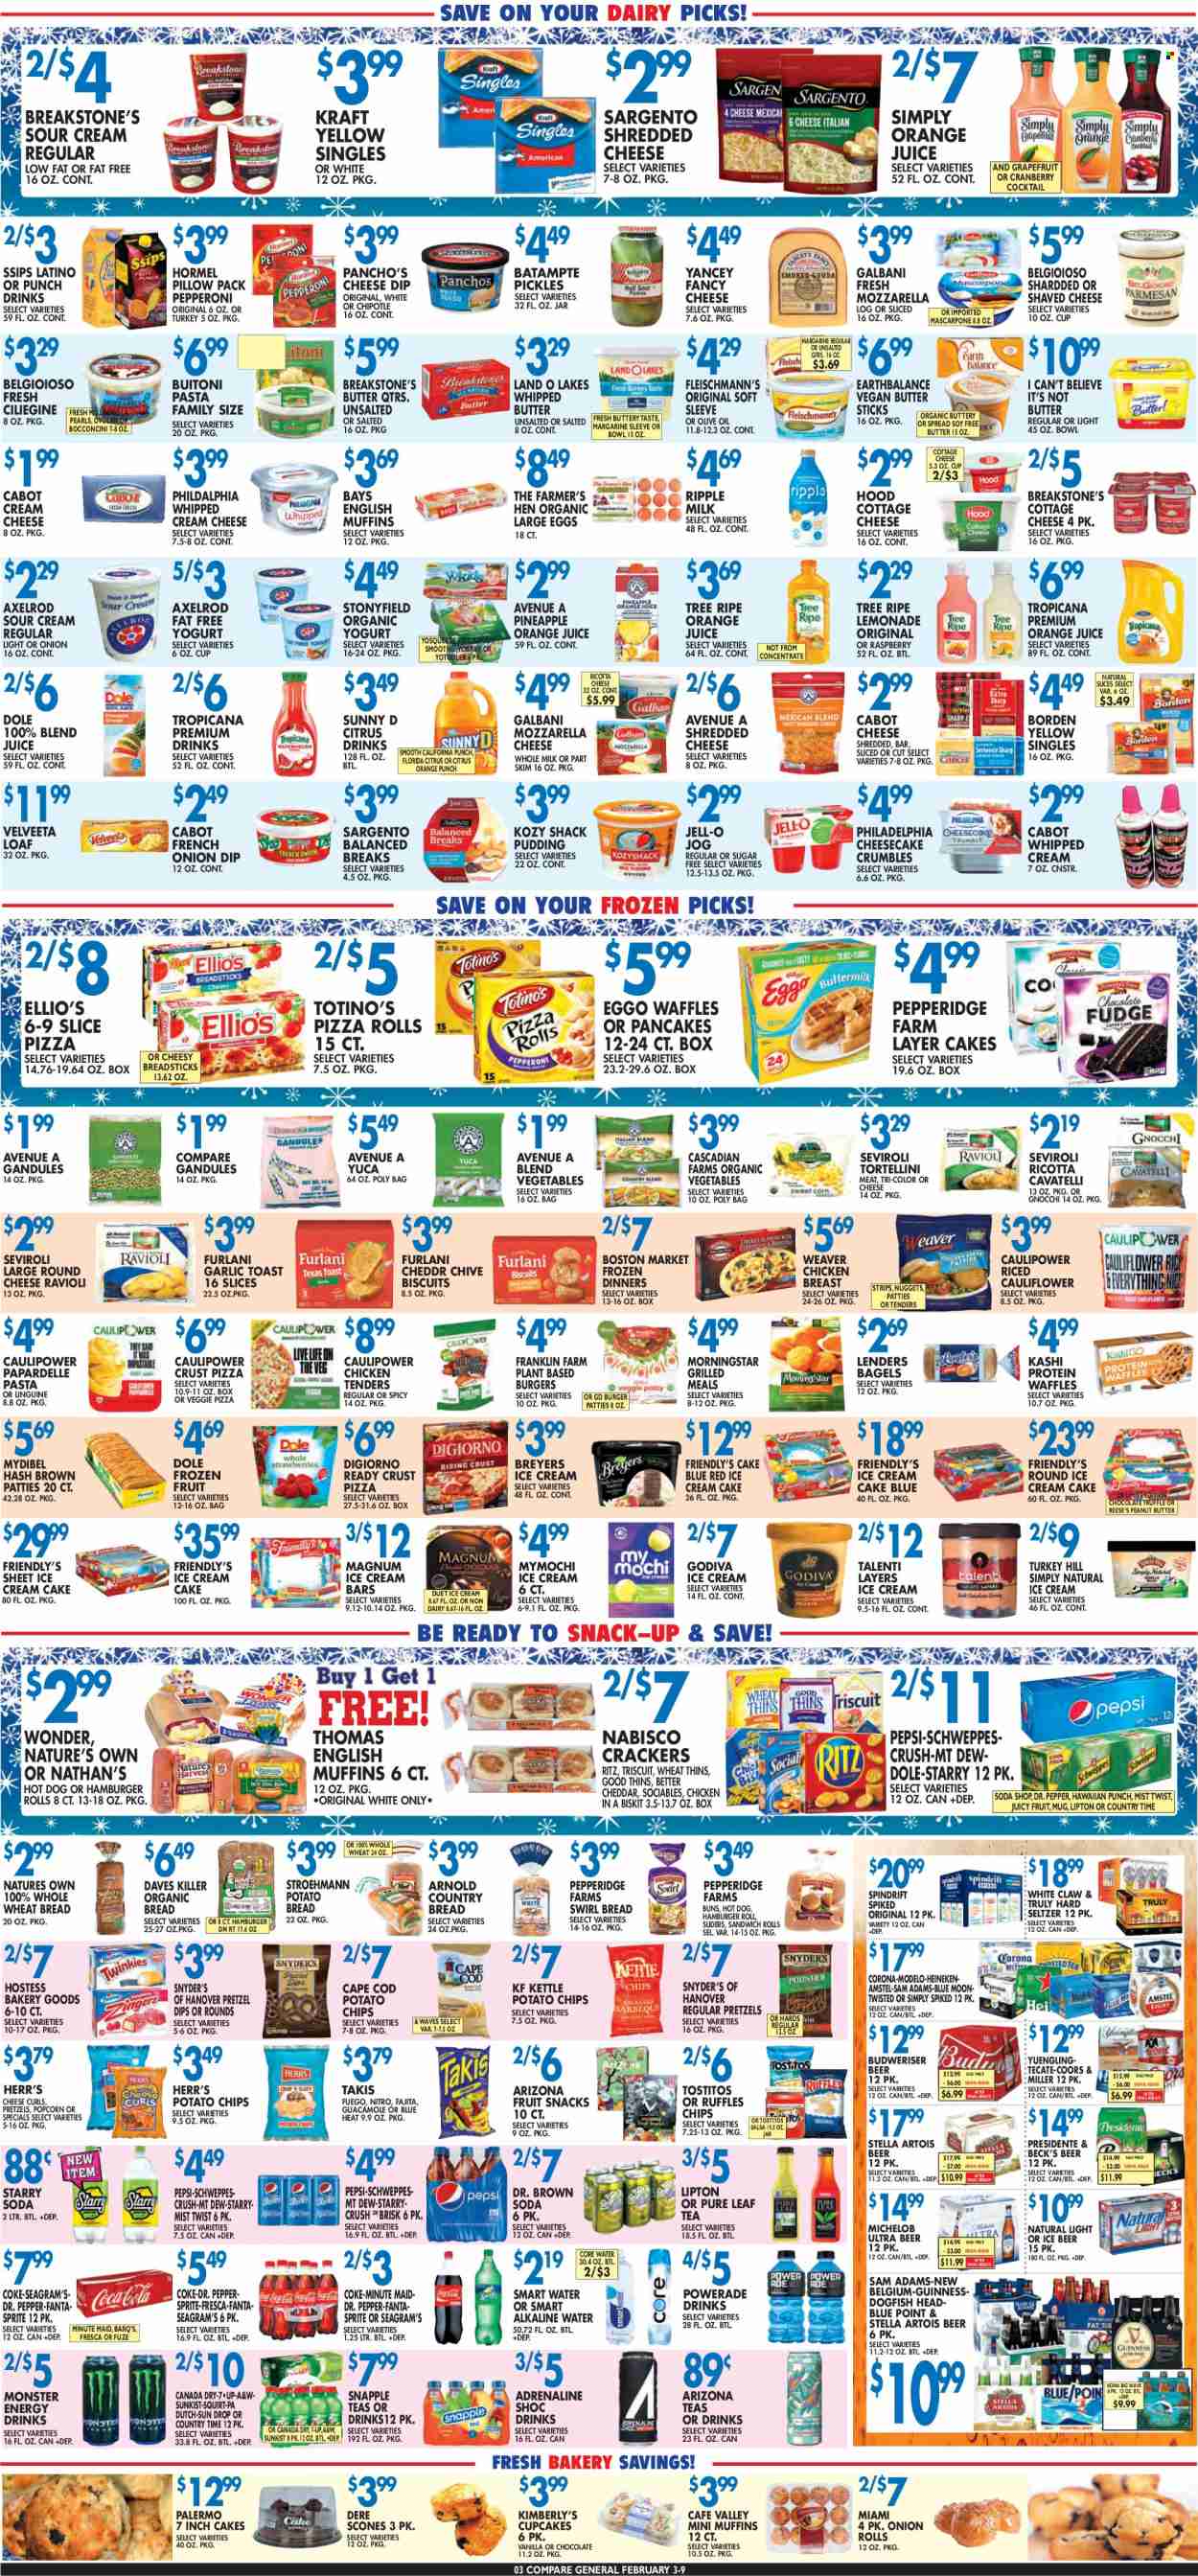 thumbnail - Compare Foods Flyer - 02/03/2023 - 02/09/2023 - Sales products - bagels, english muffins, wheat bread, pretzels, cake, pizza rolls, buns, burger buns, sandwich rolls, cupcake, waffles, Dole, grapefruits, pineapple, cod, gnocchi, ravioli, hot dog, pizza, chicken tenders, nuggets, hamburger, pasta, sauce, tortellini, fajita, Kraft®, Hormel, Buitoni, pepperoni, guacamole, bocconcini, cottage cheese, mascarpone, shredded cheese, Philadelphia, Galbani, Sargento, pudding, yoghurt, organic yoghurt, milk, large eggs, margarine, whipped butter, I Can't Believe It's Not Butter, sour cream, whipped cream, dip, ice cream, ice cream bars, Reese's, Talenti Gelato, Friendly's Ice Cream, strips, truffles, Godiva, crackers, biscuit, fruit snack, RITZ, bread sticks, potato chips, Thins, popcorn, Ruffles, Tostitos, Jell-O, pickles, pesto, salsa, olive oil, oil, peanut butter, Canada Dry, Coca-Cola, lemonade, Powerade, Pepsi, orange juice, juice, energy drink, Monster, Lipton, Dr. Pepper, 7UP, Monster Energy, AriZona, Snapple, A&W, Country Time, Spindrift, fruit punch, smoothie, soda, Smartwater, alkaline water, tea, Pure Leaf, White Claw, Hard Seltzer, TRULY, beer, Stella Artois, Corona Extra, Miller, Beck's, Modelo, chicken breasts, burger patties, bowl, Nature's Own, Coors, Michelob. Page 3.